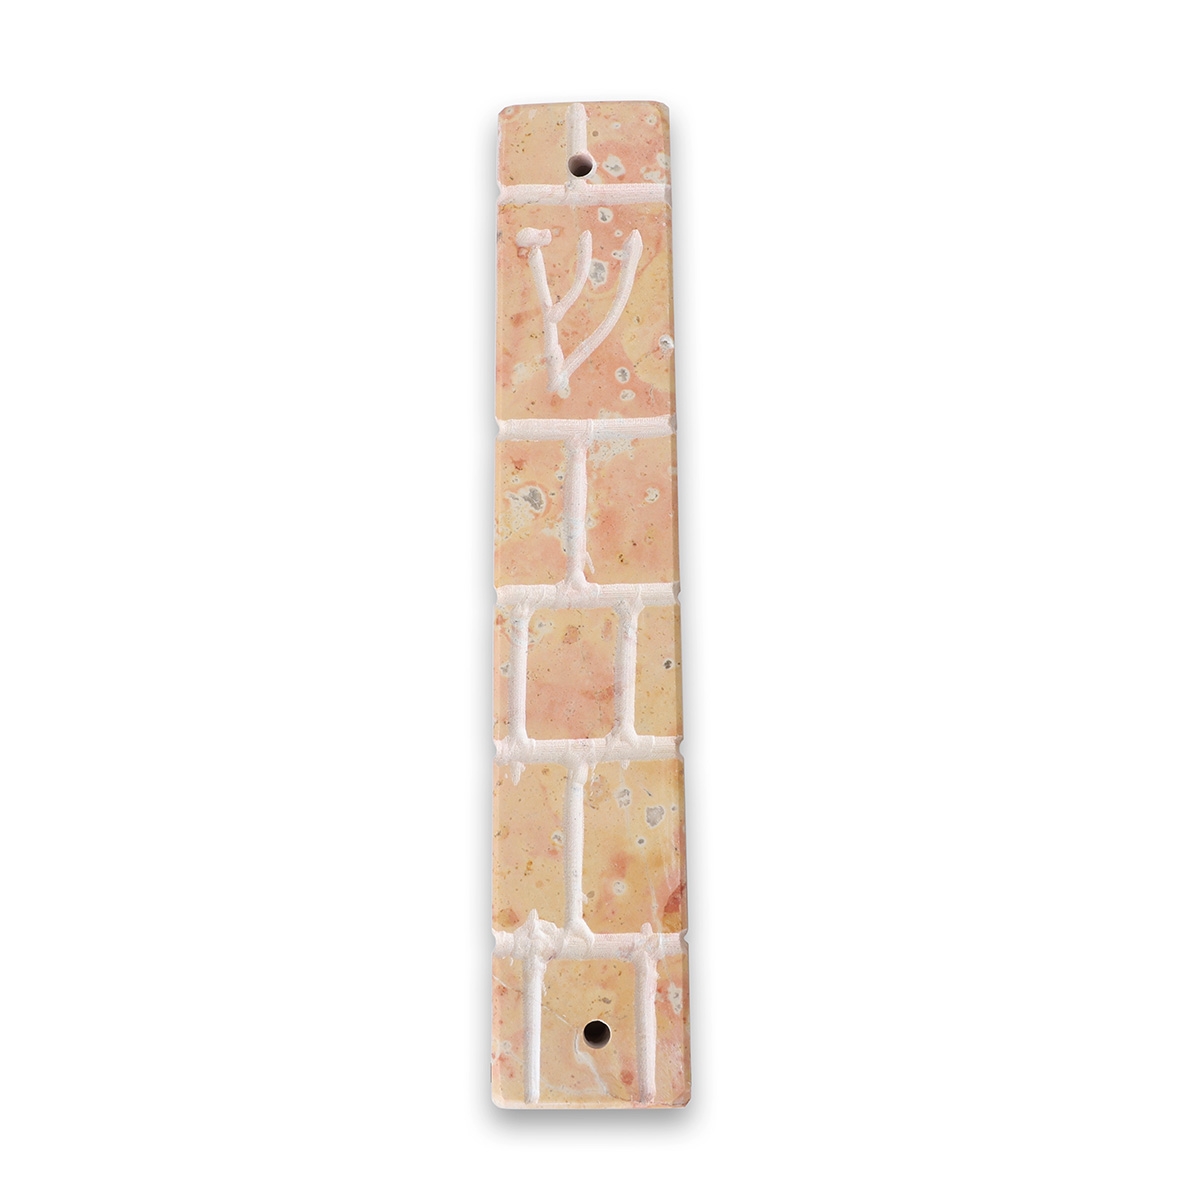 Large Red Jerusalem Stone Mezuzah Case With Western Wall Design - 1